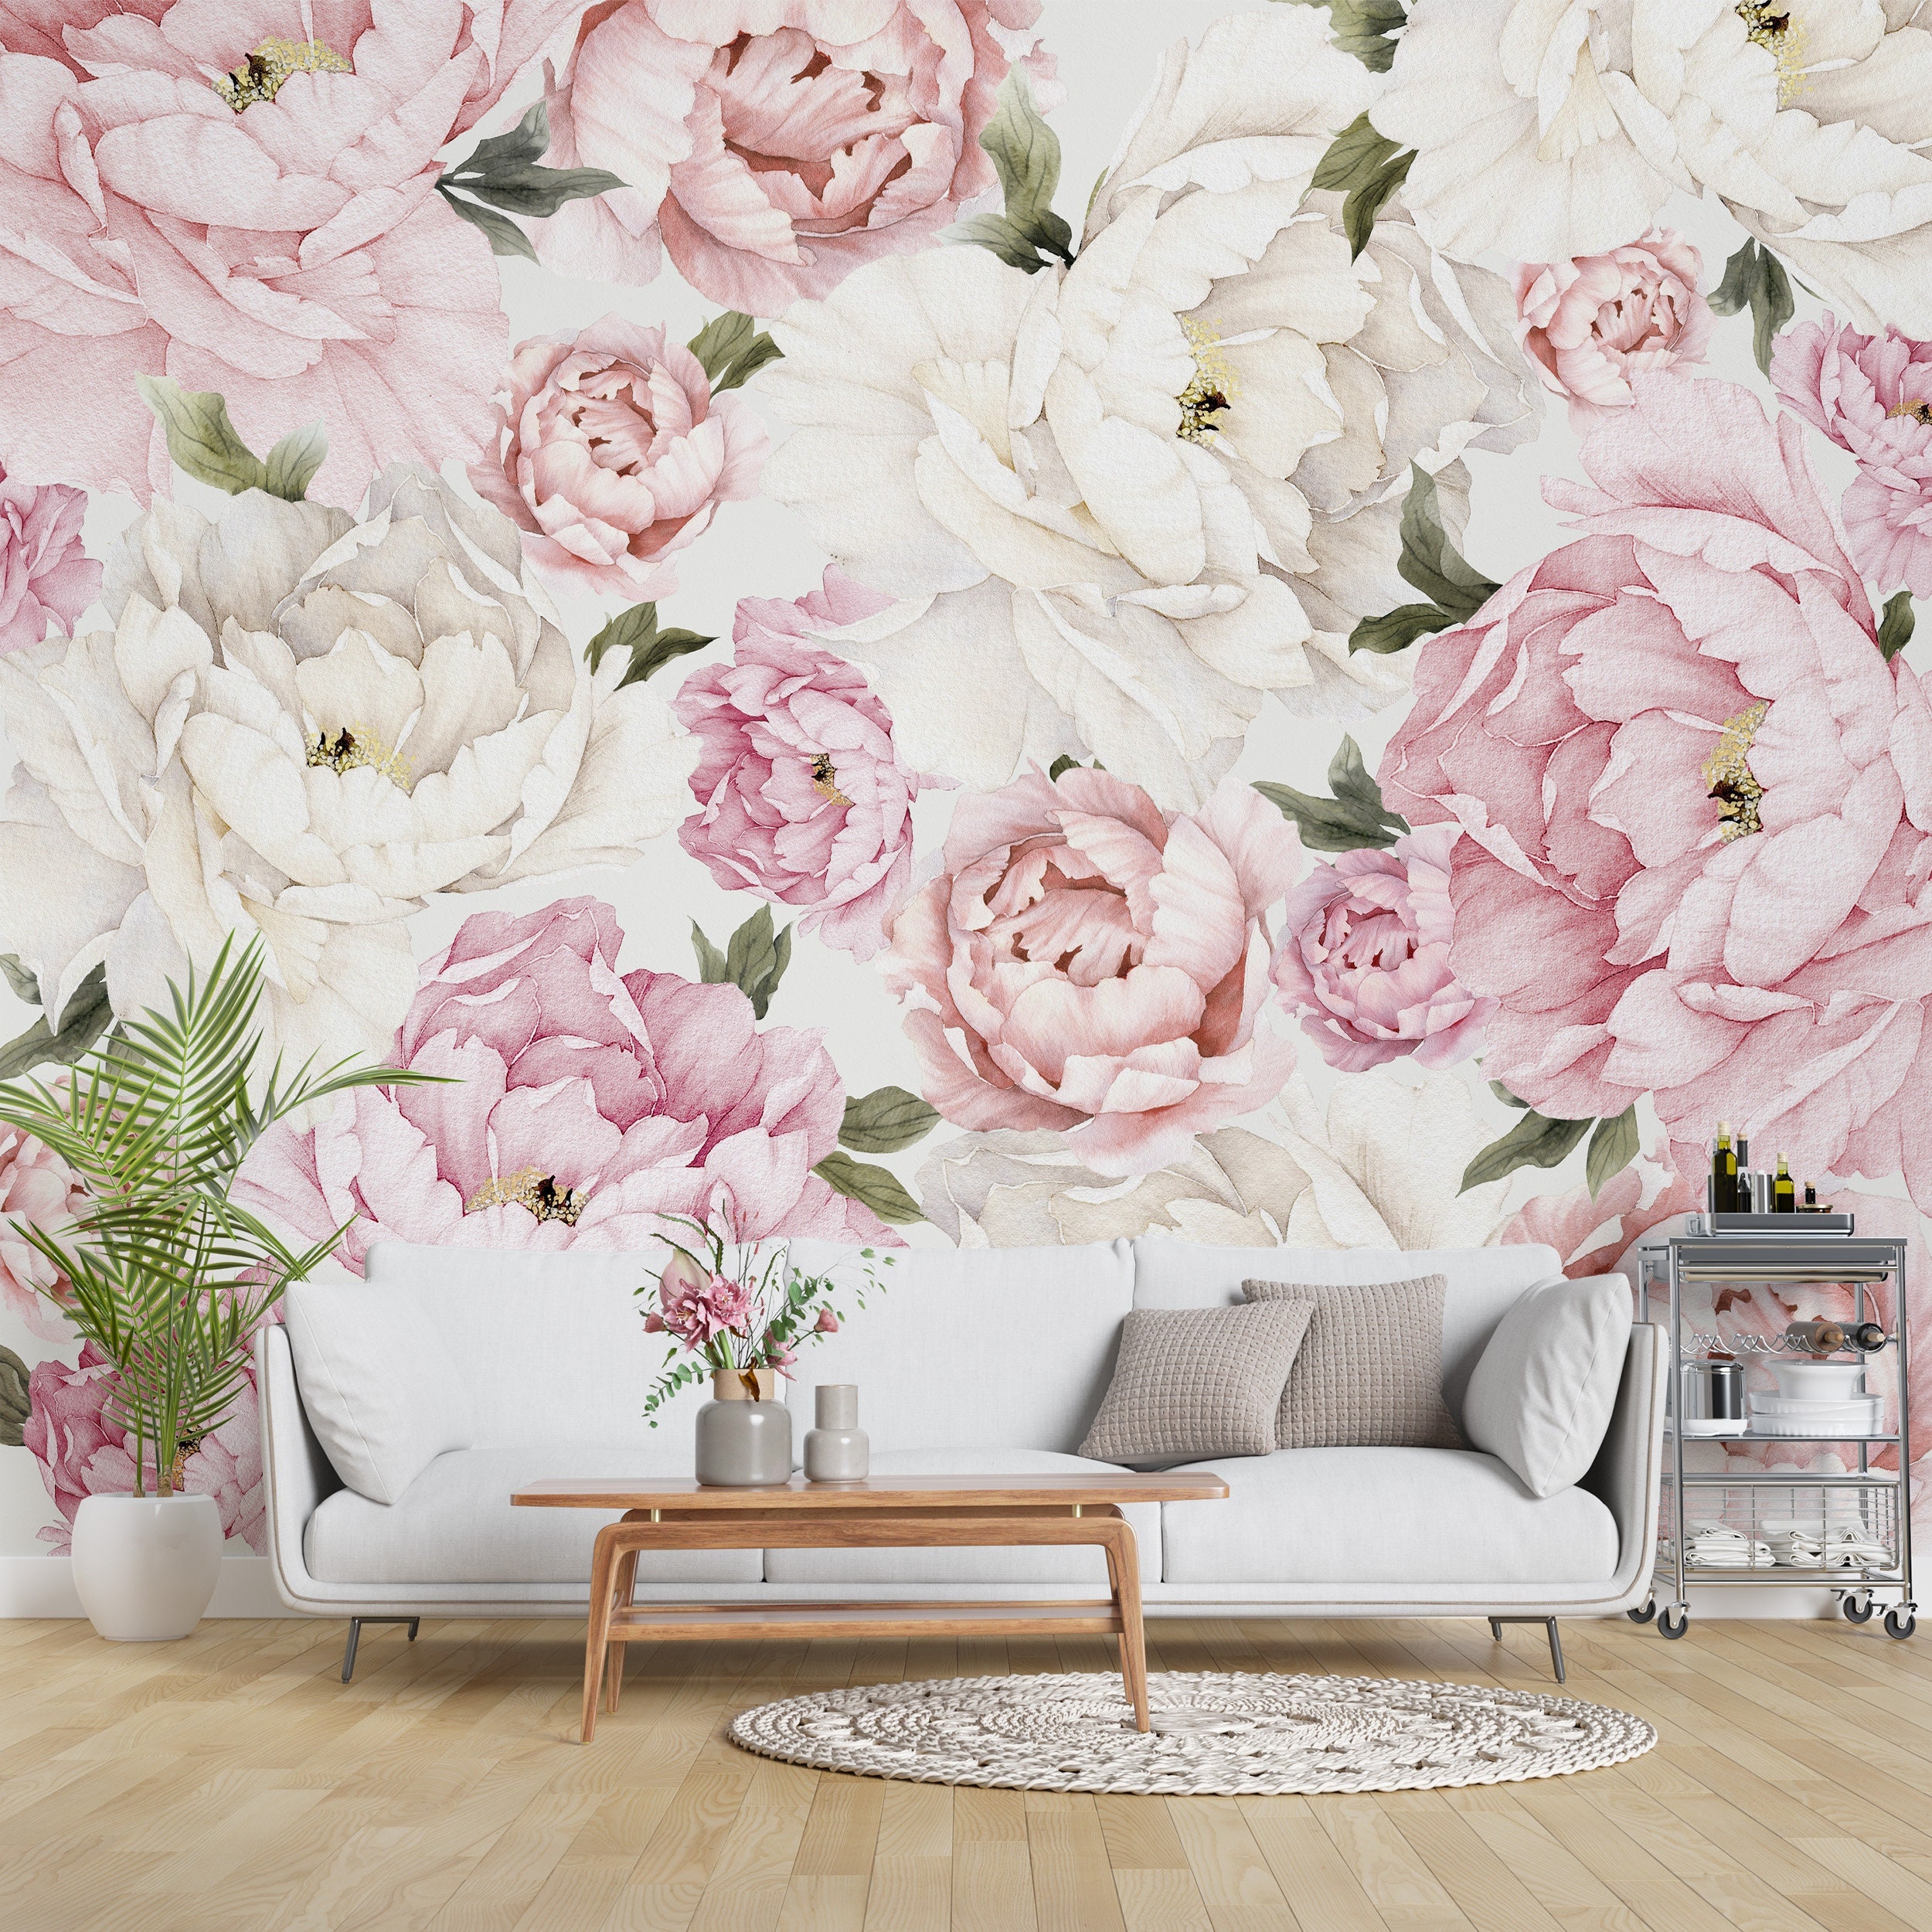 Yirtree Peony Flowers Bedroom Wall Decor, White&Pink Floral